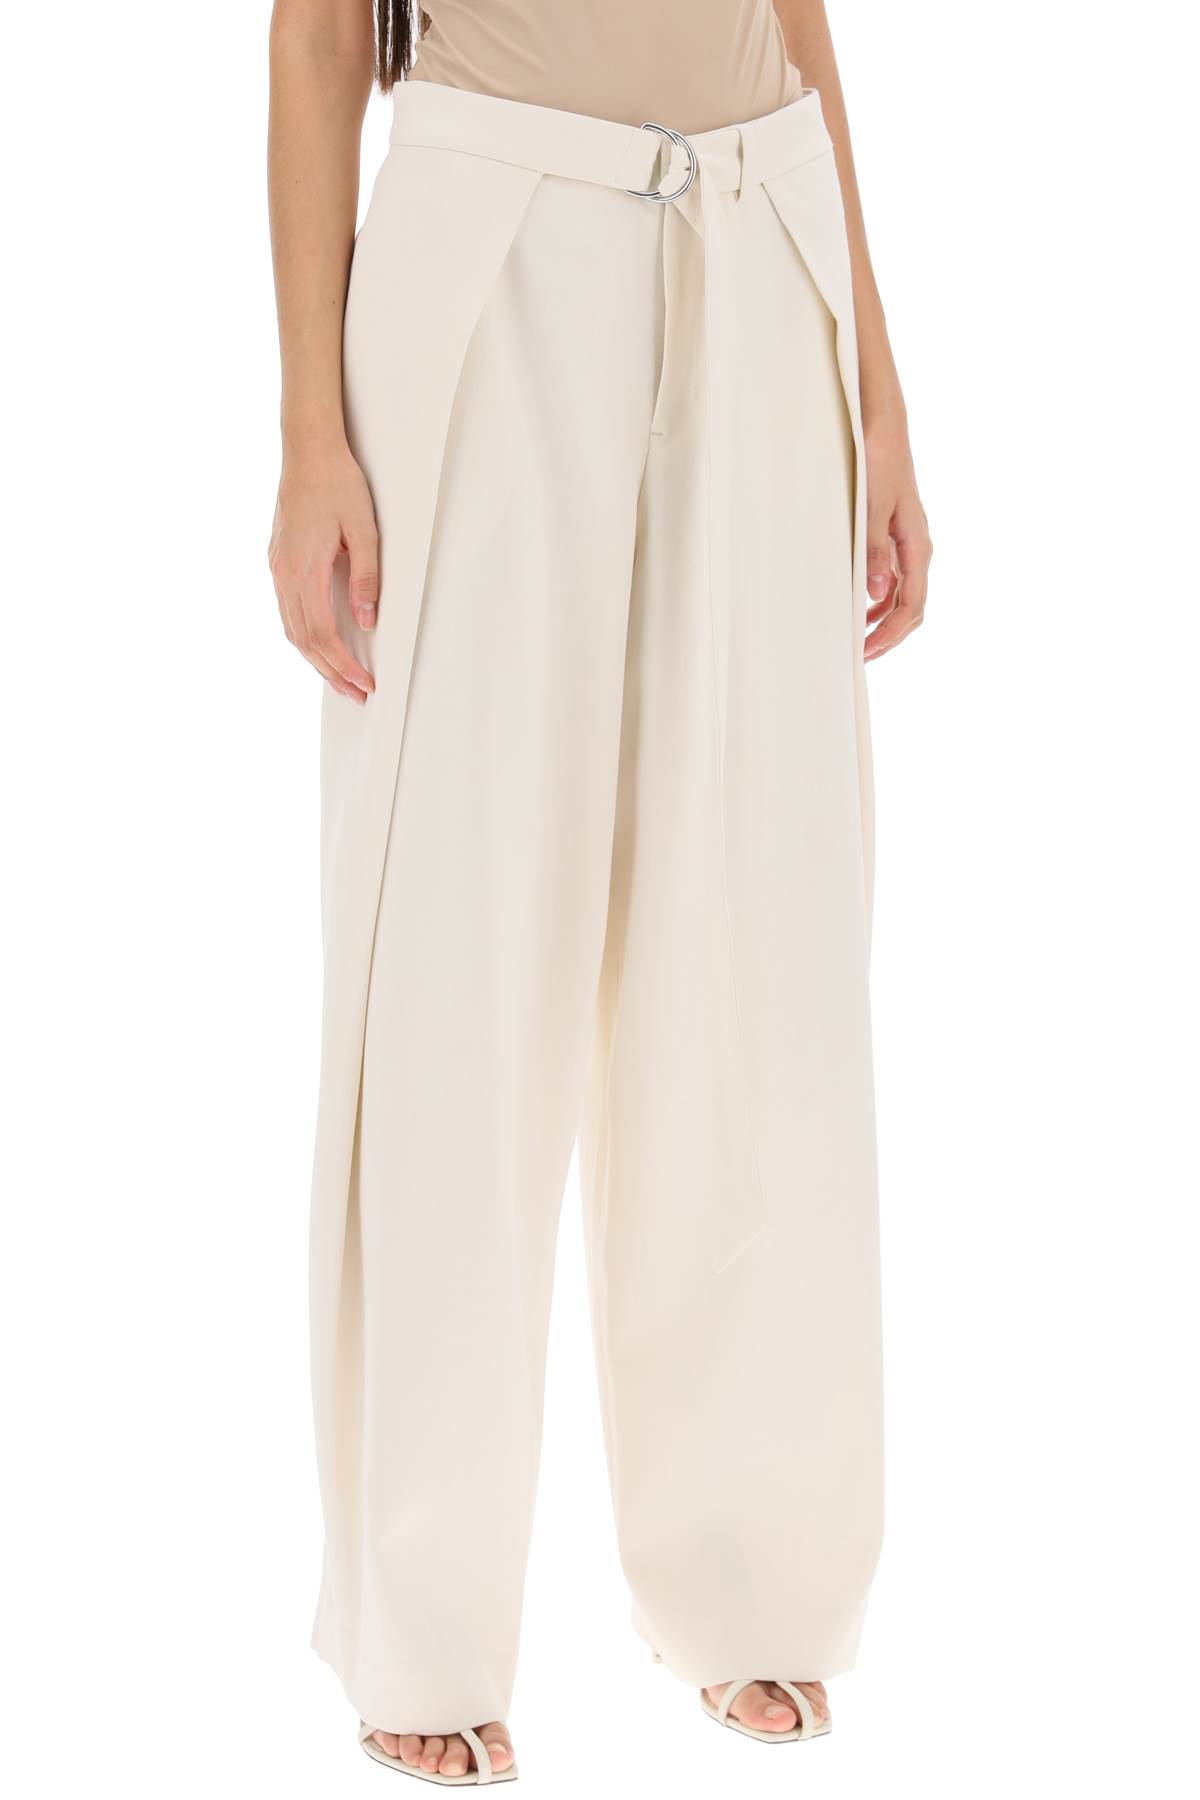 Shop Ami Alexandre Mattiussi Wide Fit Pants With Floating Panels In Ivory (white)